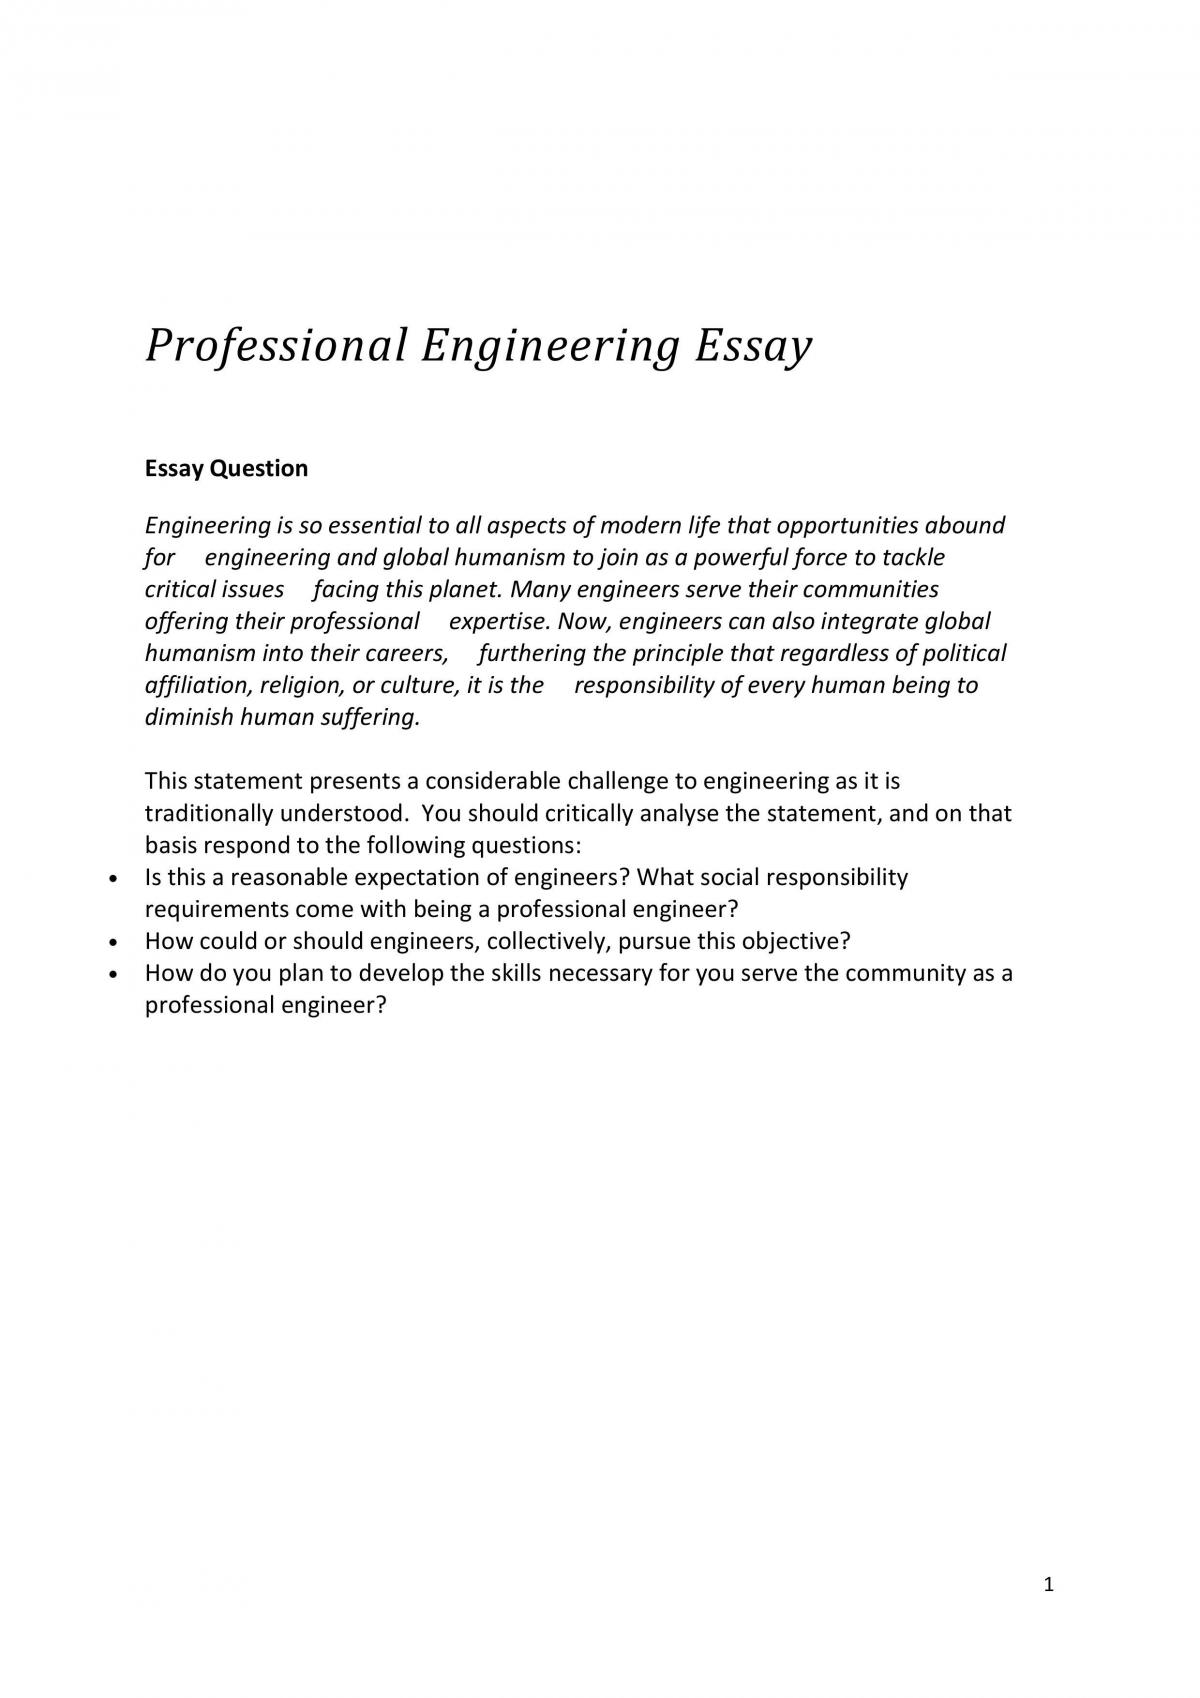 essay writing topics for engineering students